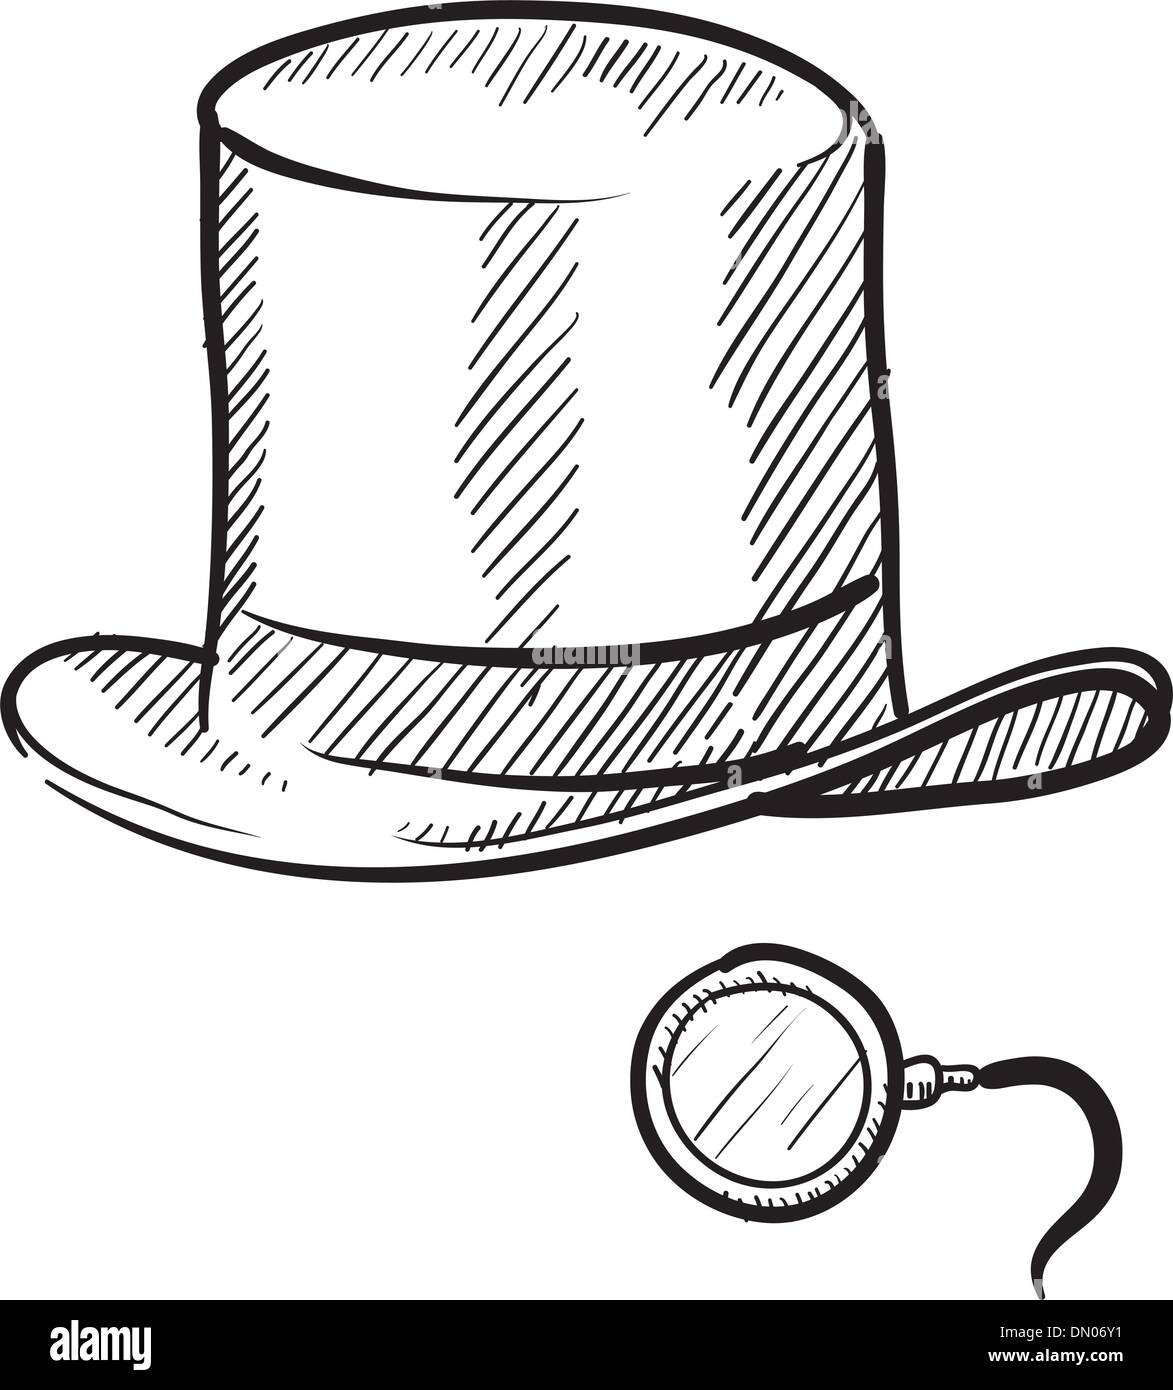 Top hat and monocle sketch Stock Vector